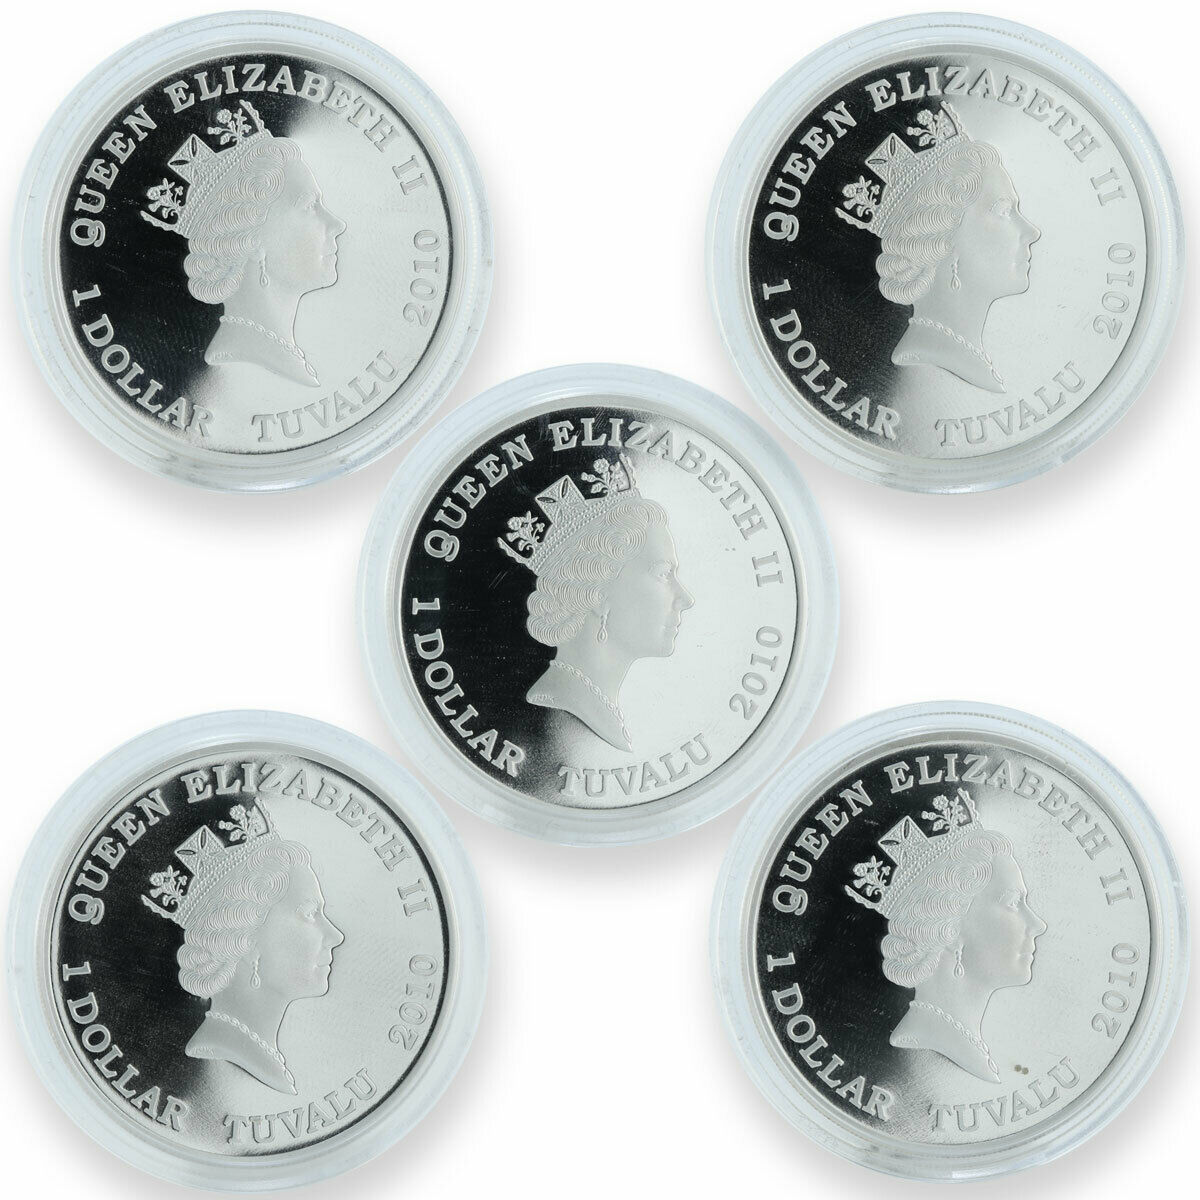 Tuvalu set of 5 coins Great River Journeys proof silver 2010